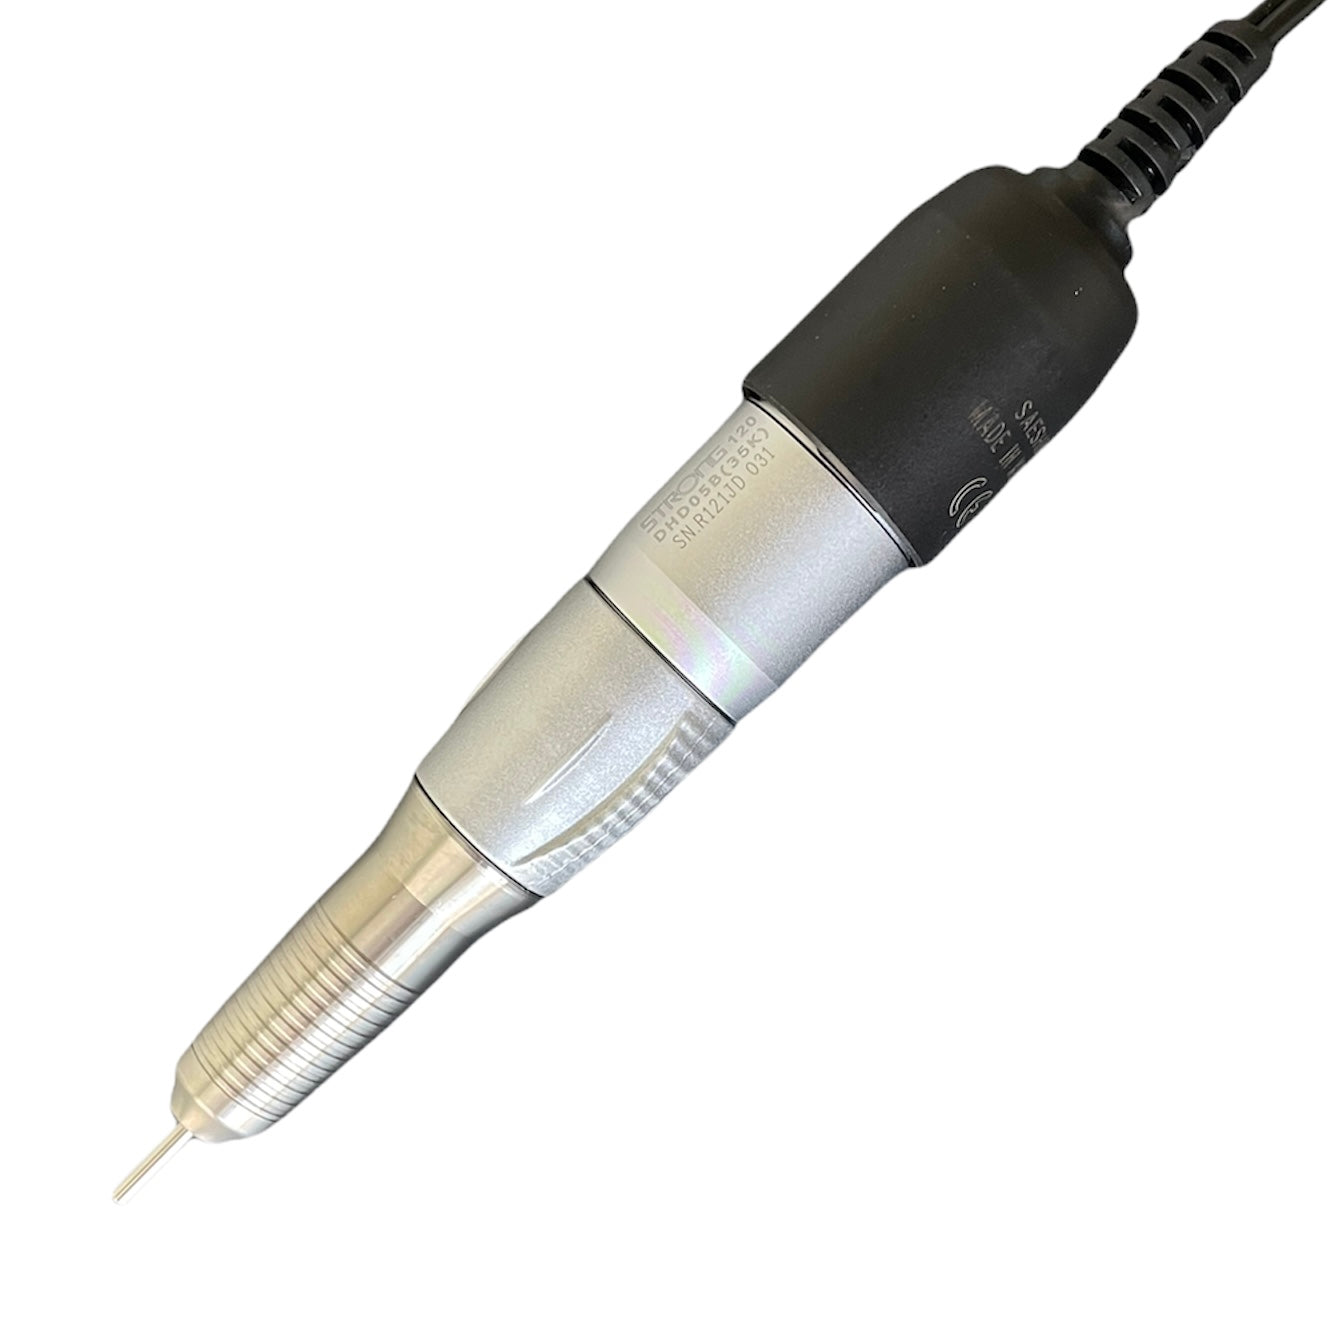 Micro Motor Handpiece STRONG 120 by SAESHIN, 35K RPM (Made in Korea)